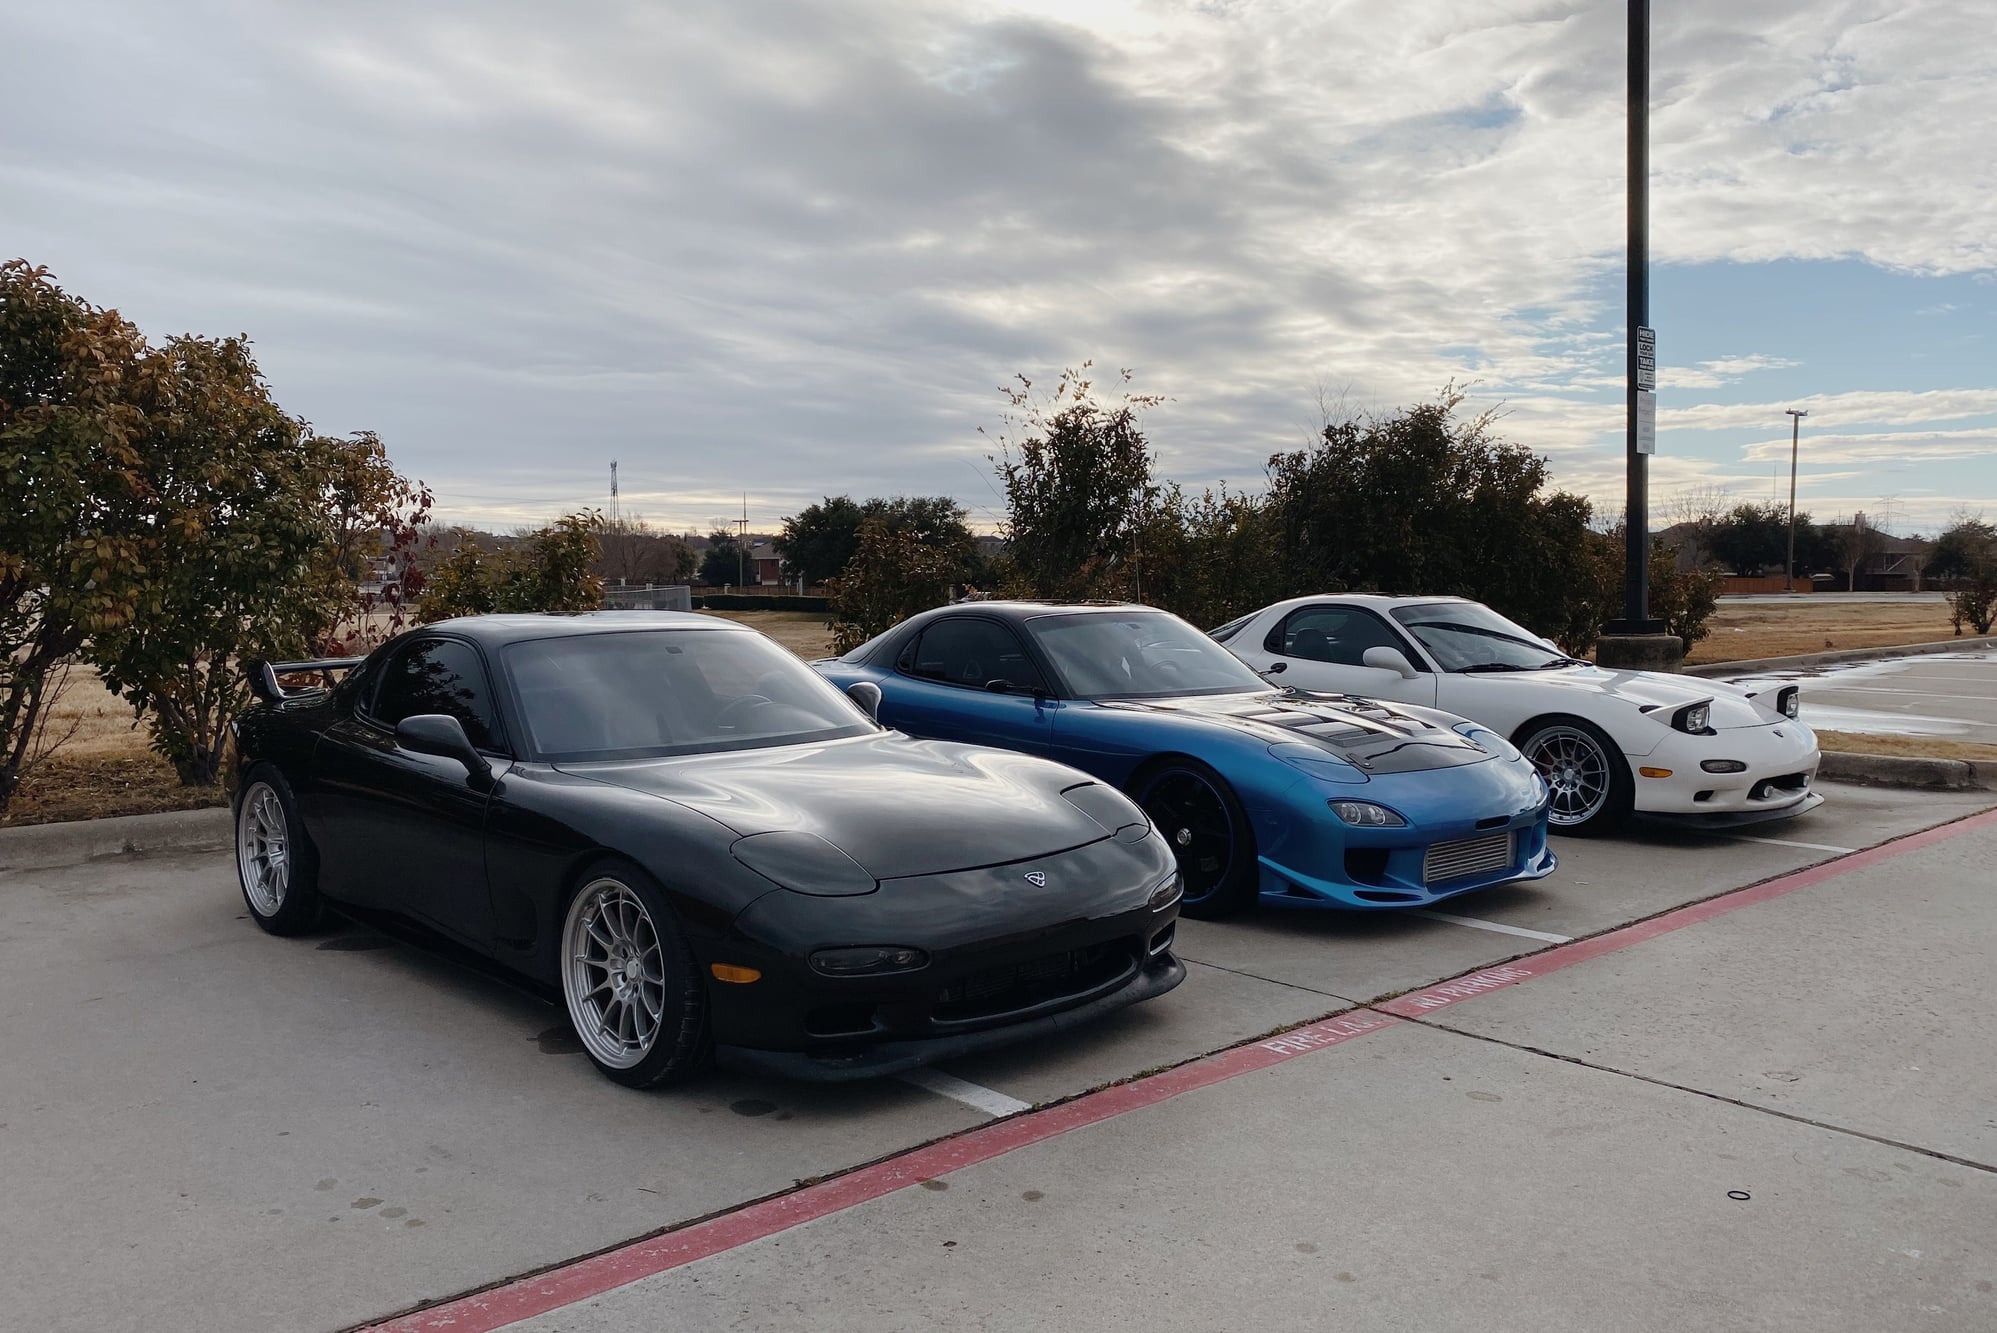 1993 Mazda RX-7 - 1993 Mazda RX-7 with LS3, Ford 8.8, T-56, Complete Interior, New Wheels, & more - Used - VIN JM1FD3311P0201923 - 160,000 Miles - 8 cyl - 2WD - Manual - Coupe - Gray - Fort Worth, TX 76111, United States